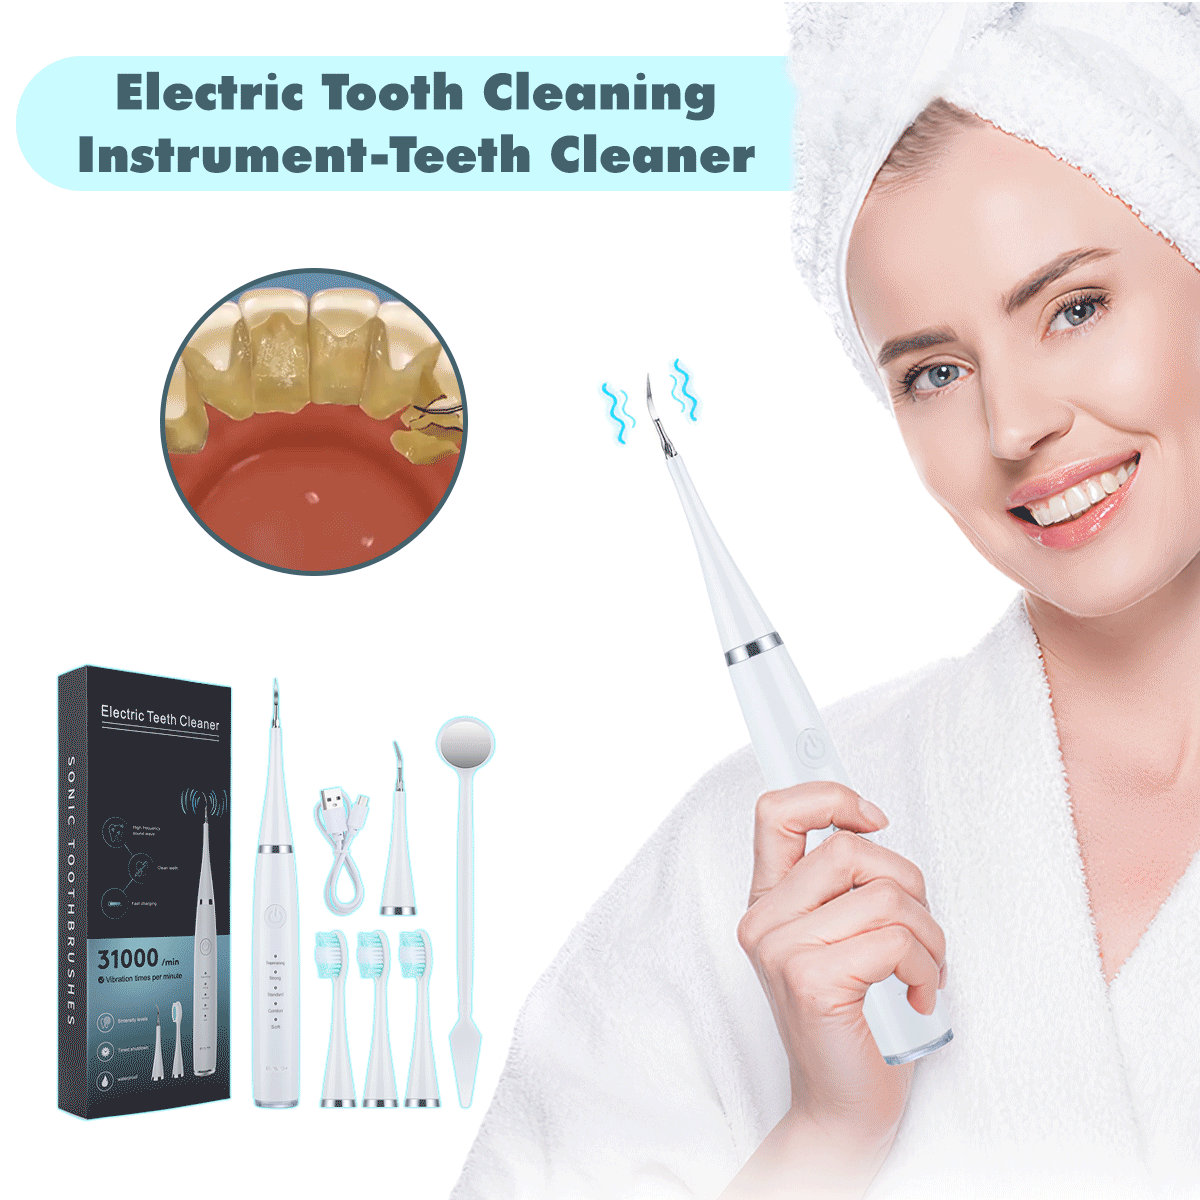 Electric tooth cleaning